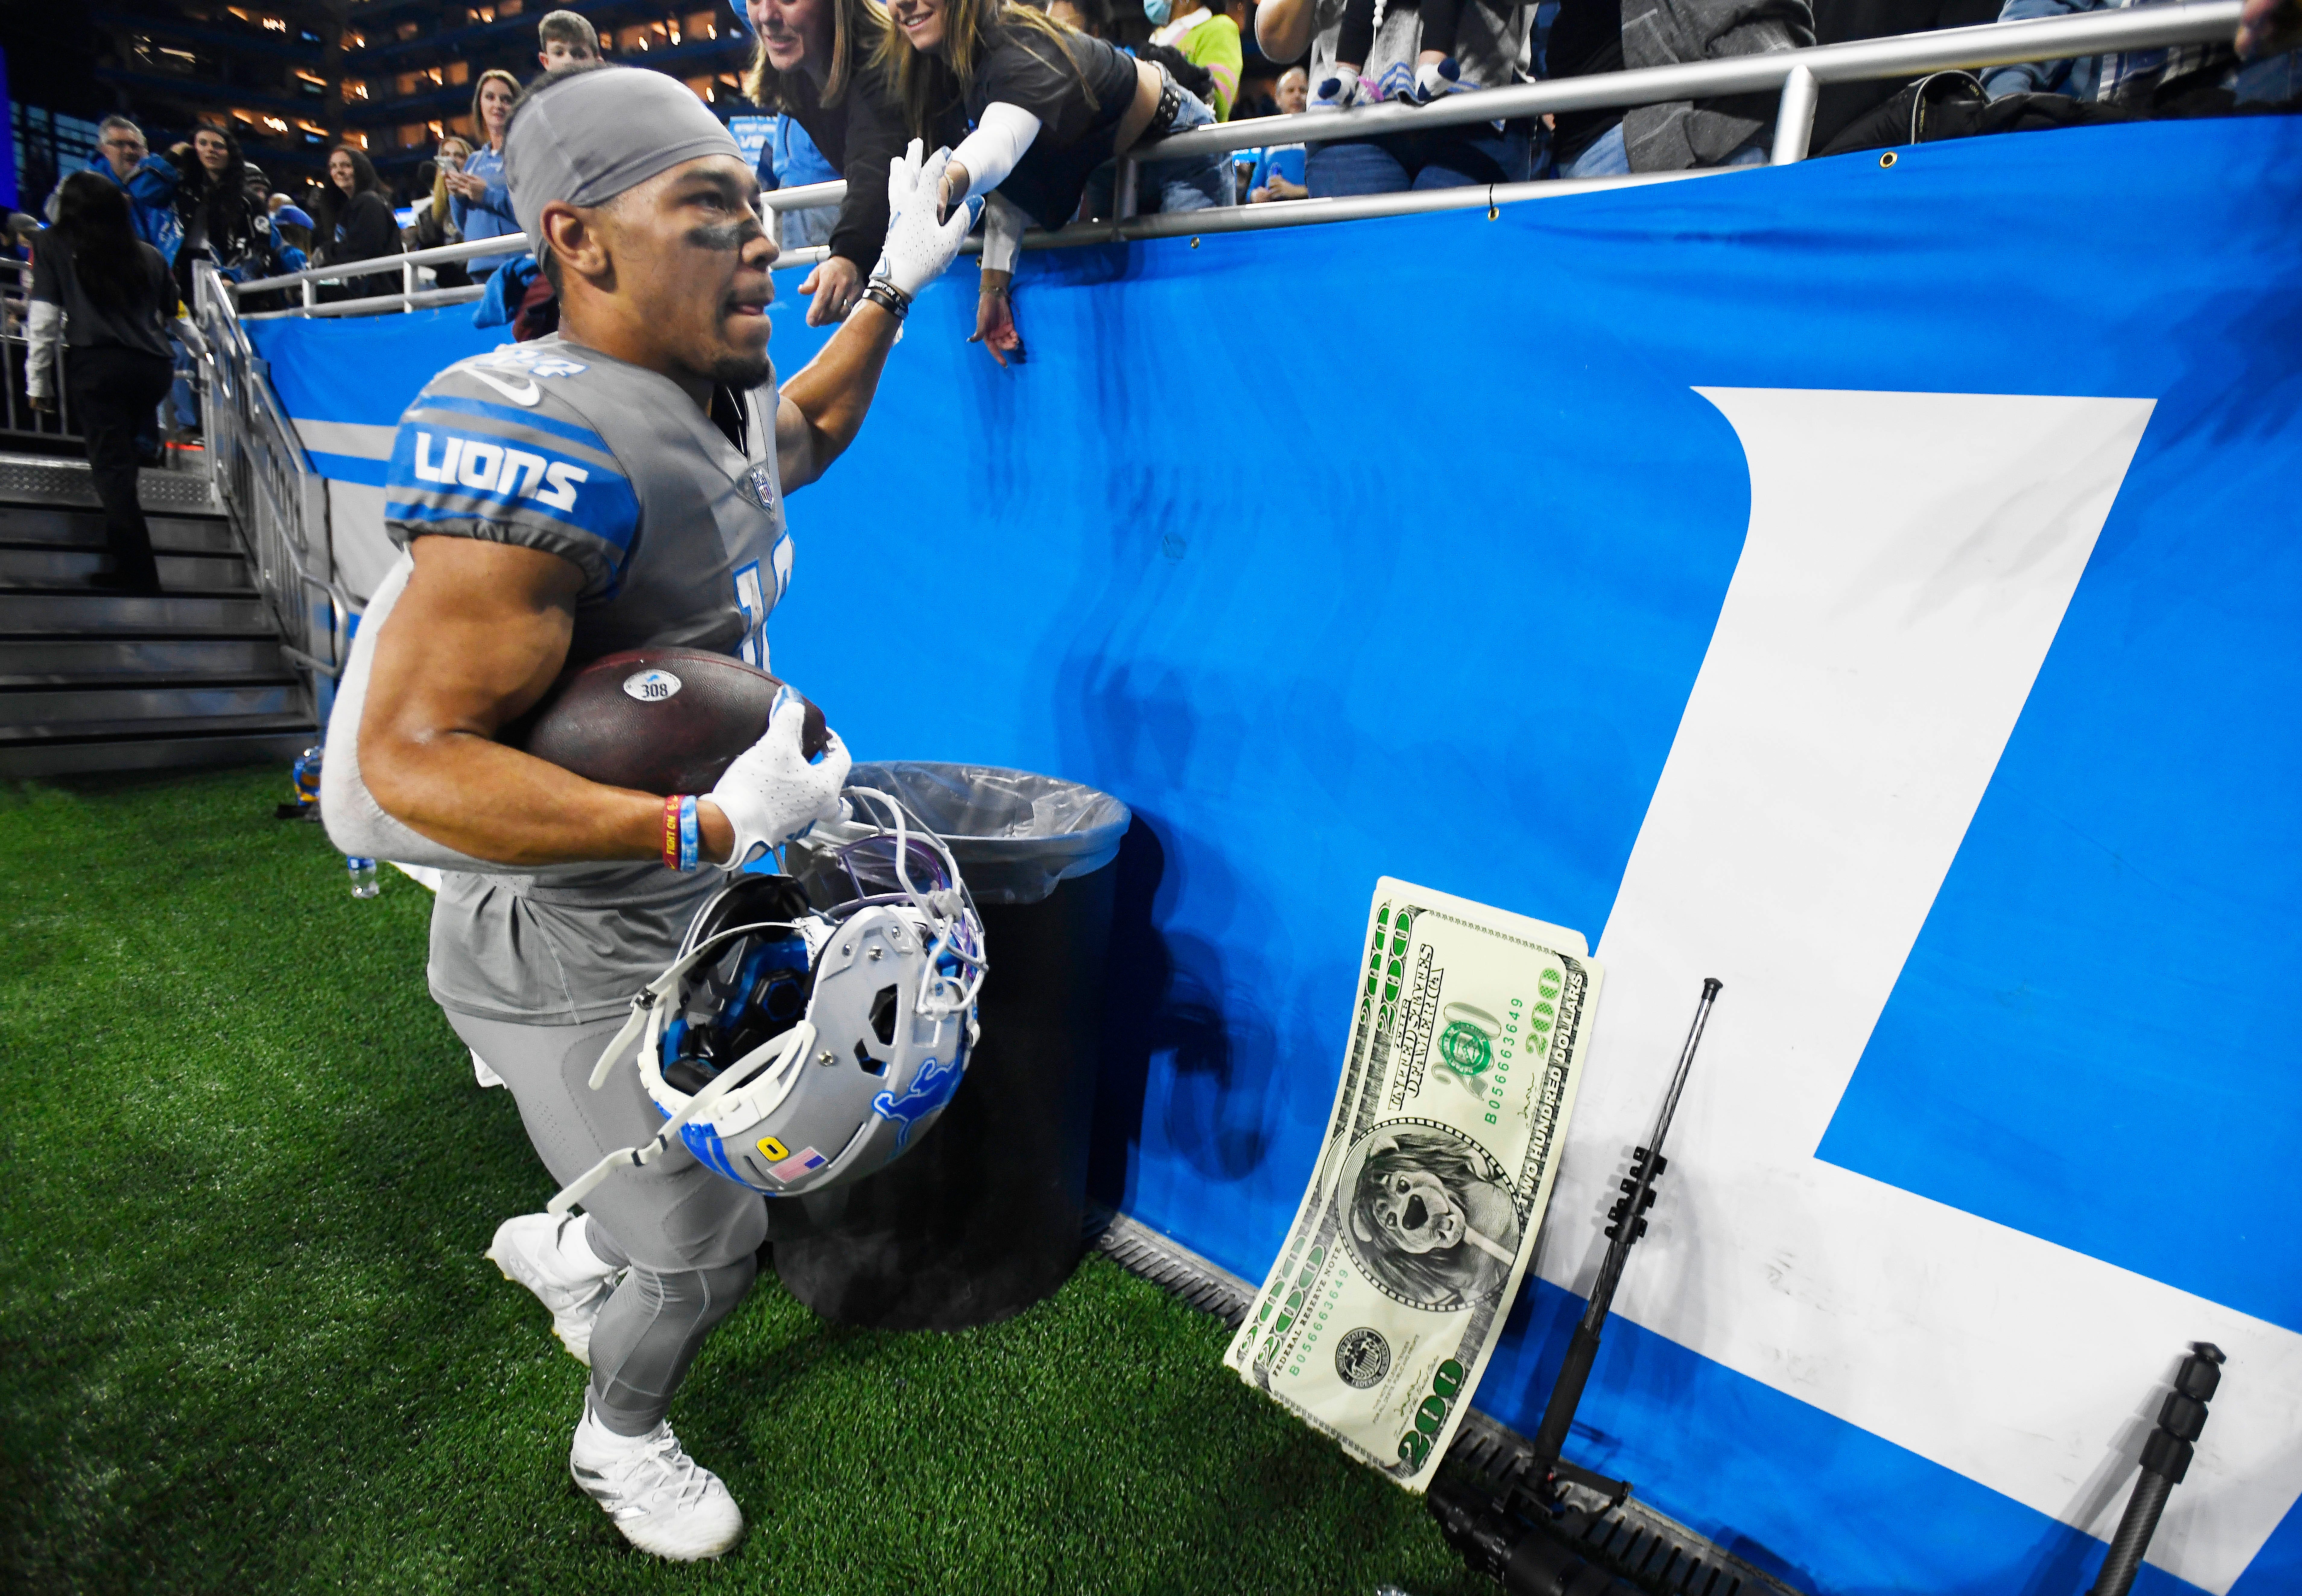 Lions' Amon-Ra St. Brown leaves the field after making the big money play, a reception in the end zone for the game winning touchdown, with no time left on the clock, over the Vikings, 29-27.